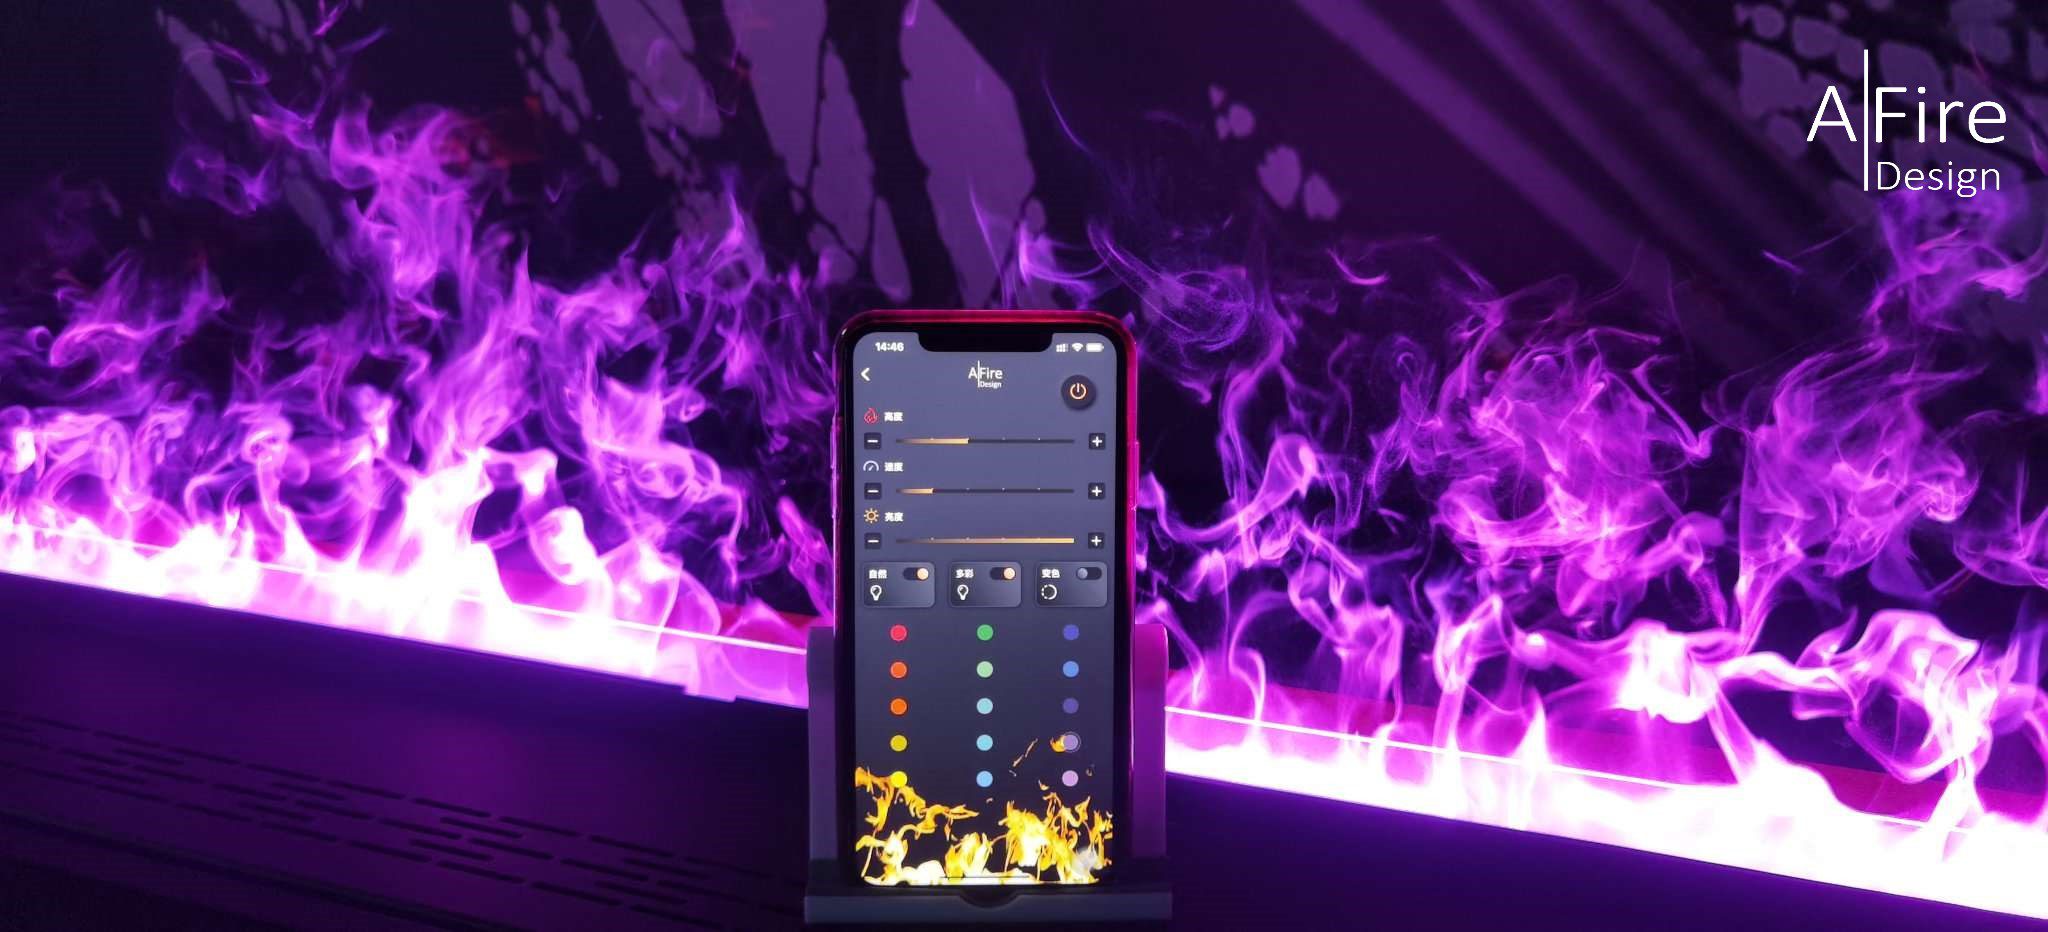 Smartphone App for fireplace